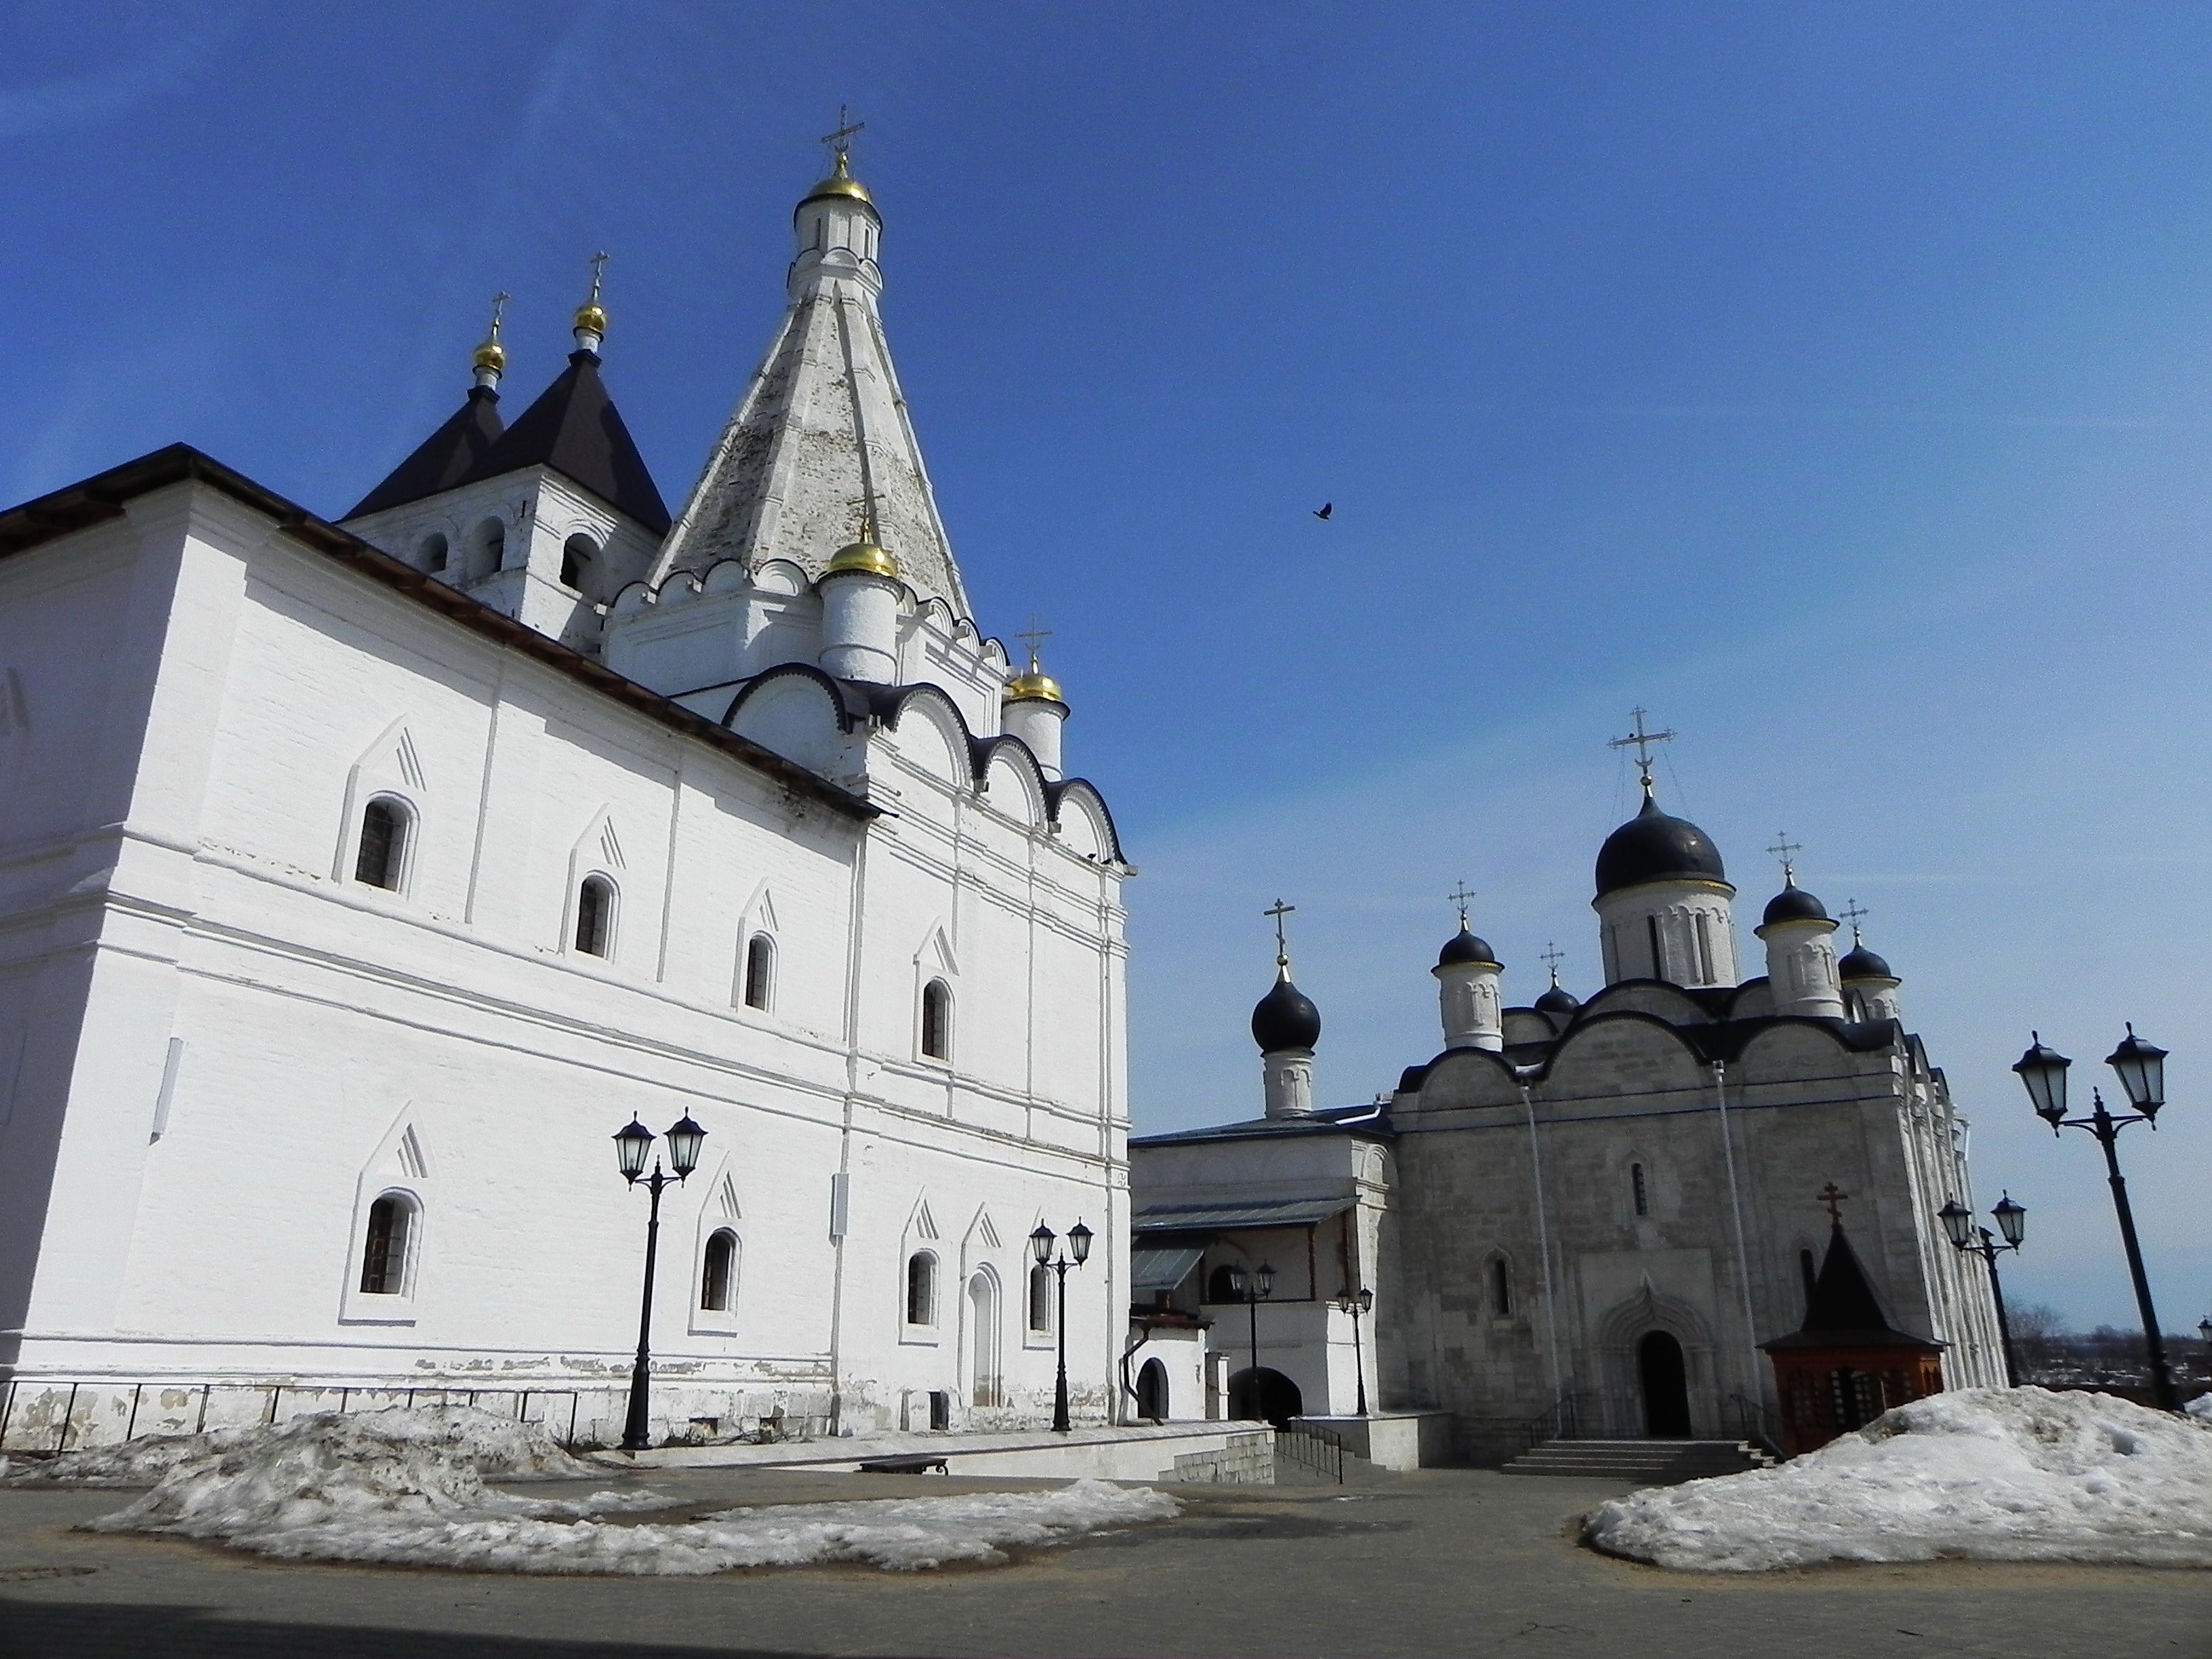 The school was attached to the Vladychny convent in Serpukhov